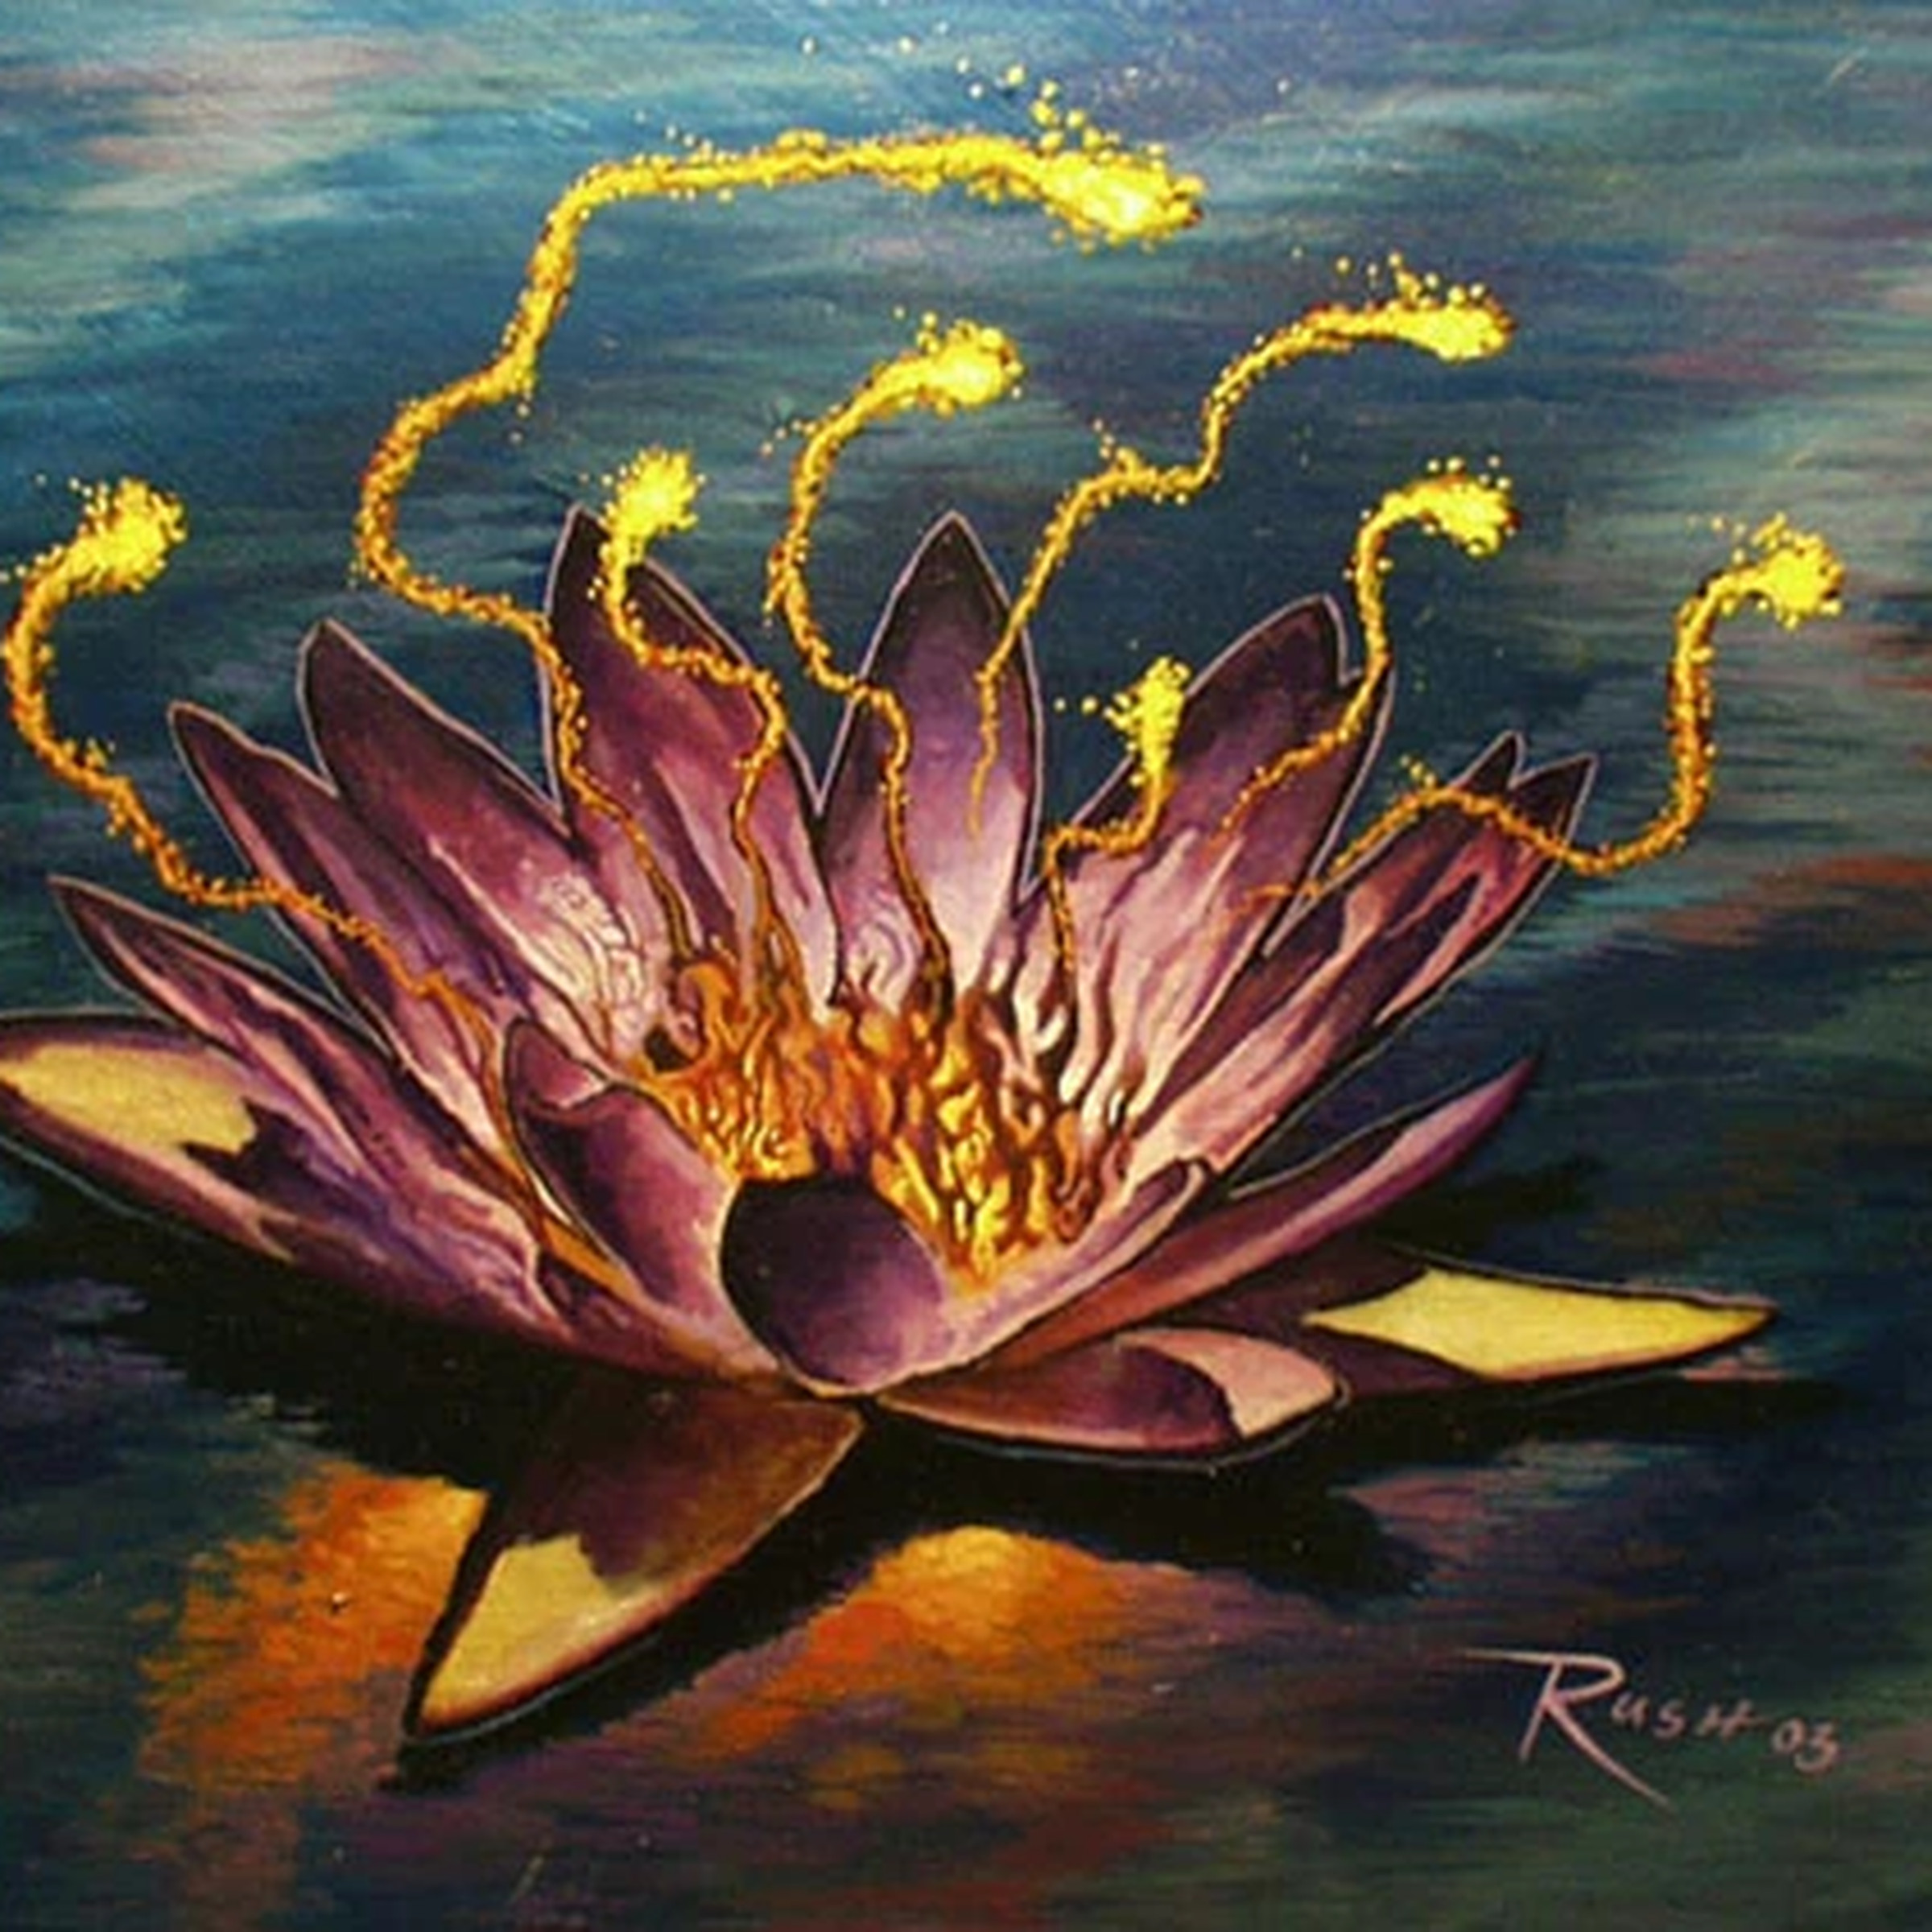 Image of the card art from an alternate version of the Black Lotus Magic: The Gathering card art signed by Christopher Rush